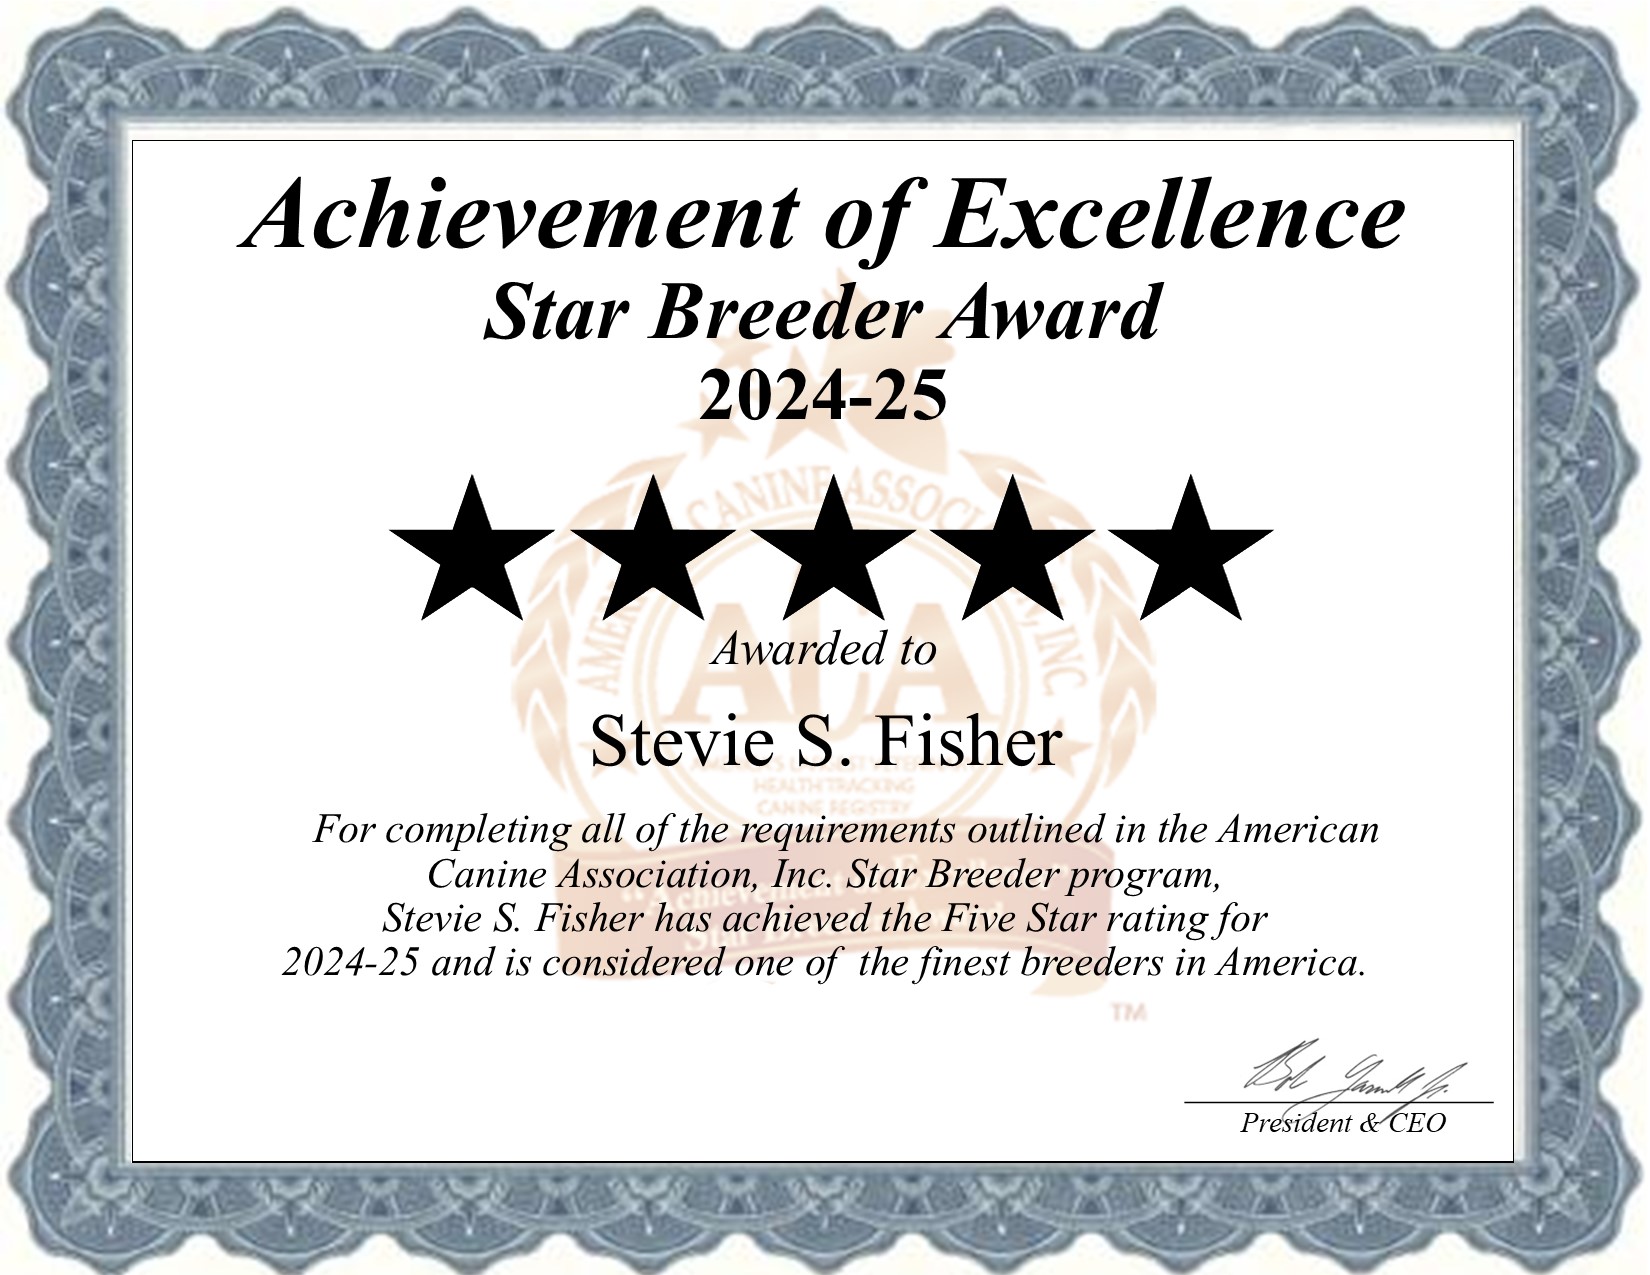 Stevie S., Fisher, dog, breeder, star, certificate, Stevie S.-Fisher, Ronks, PA, Pennsylvania, puppy, dog, kennels, mill, puppymill, usda, 5-star, aca, ica, registered, Shih Tzu